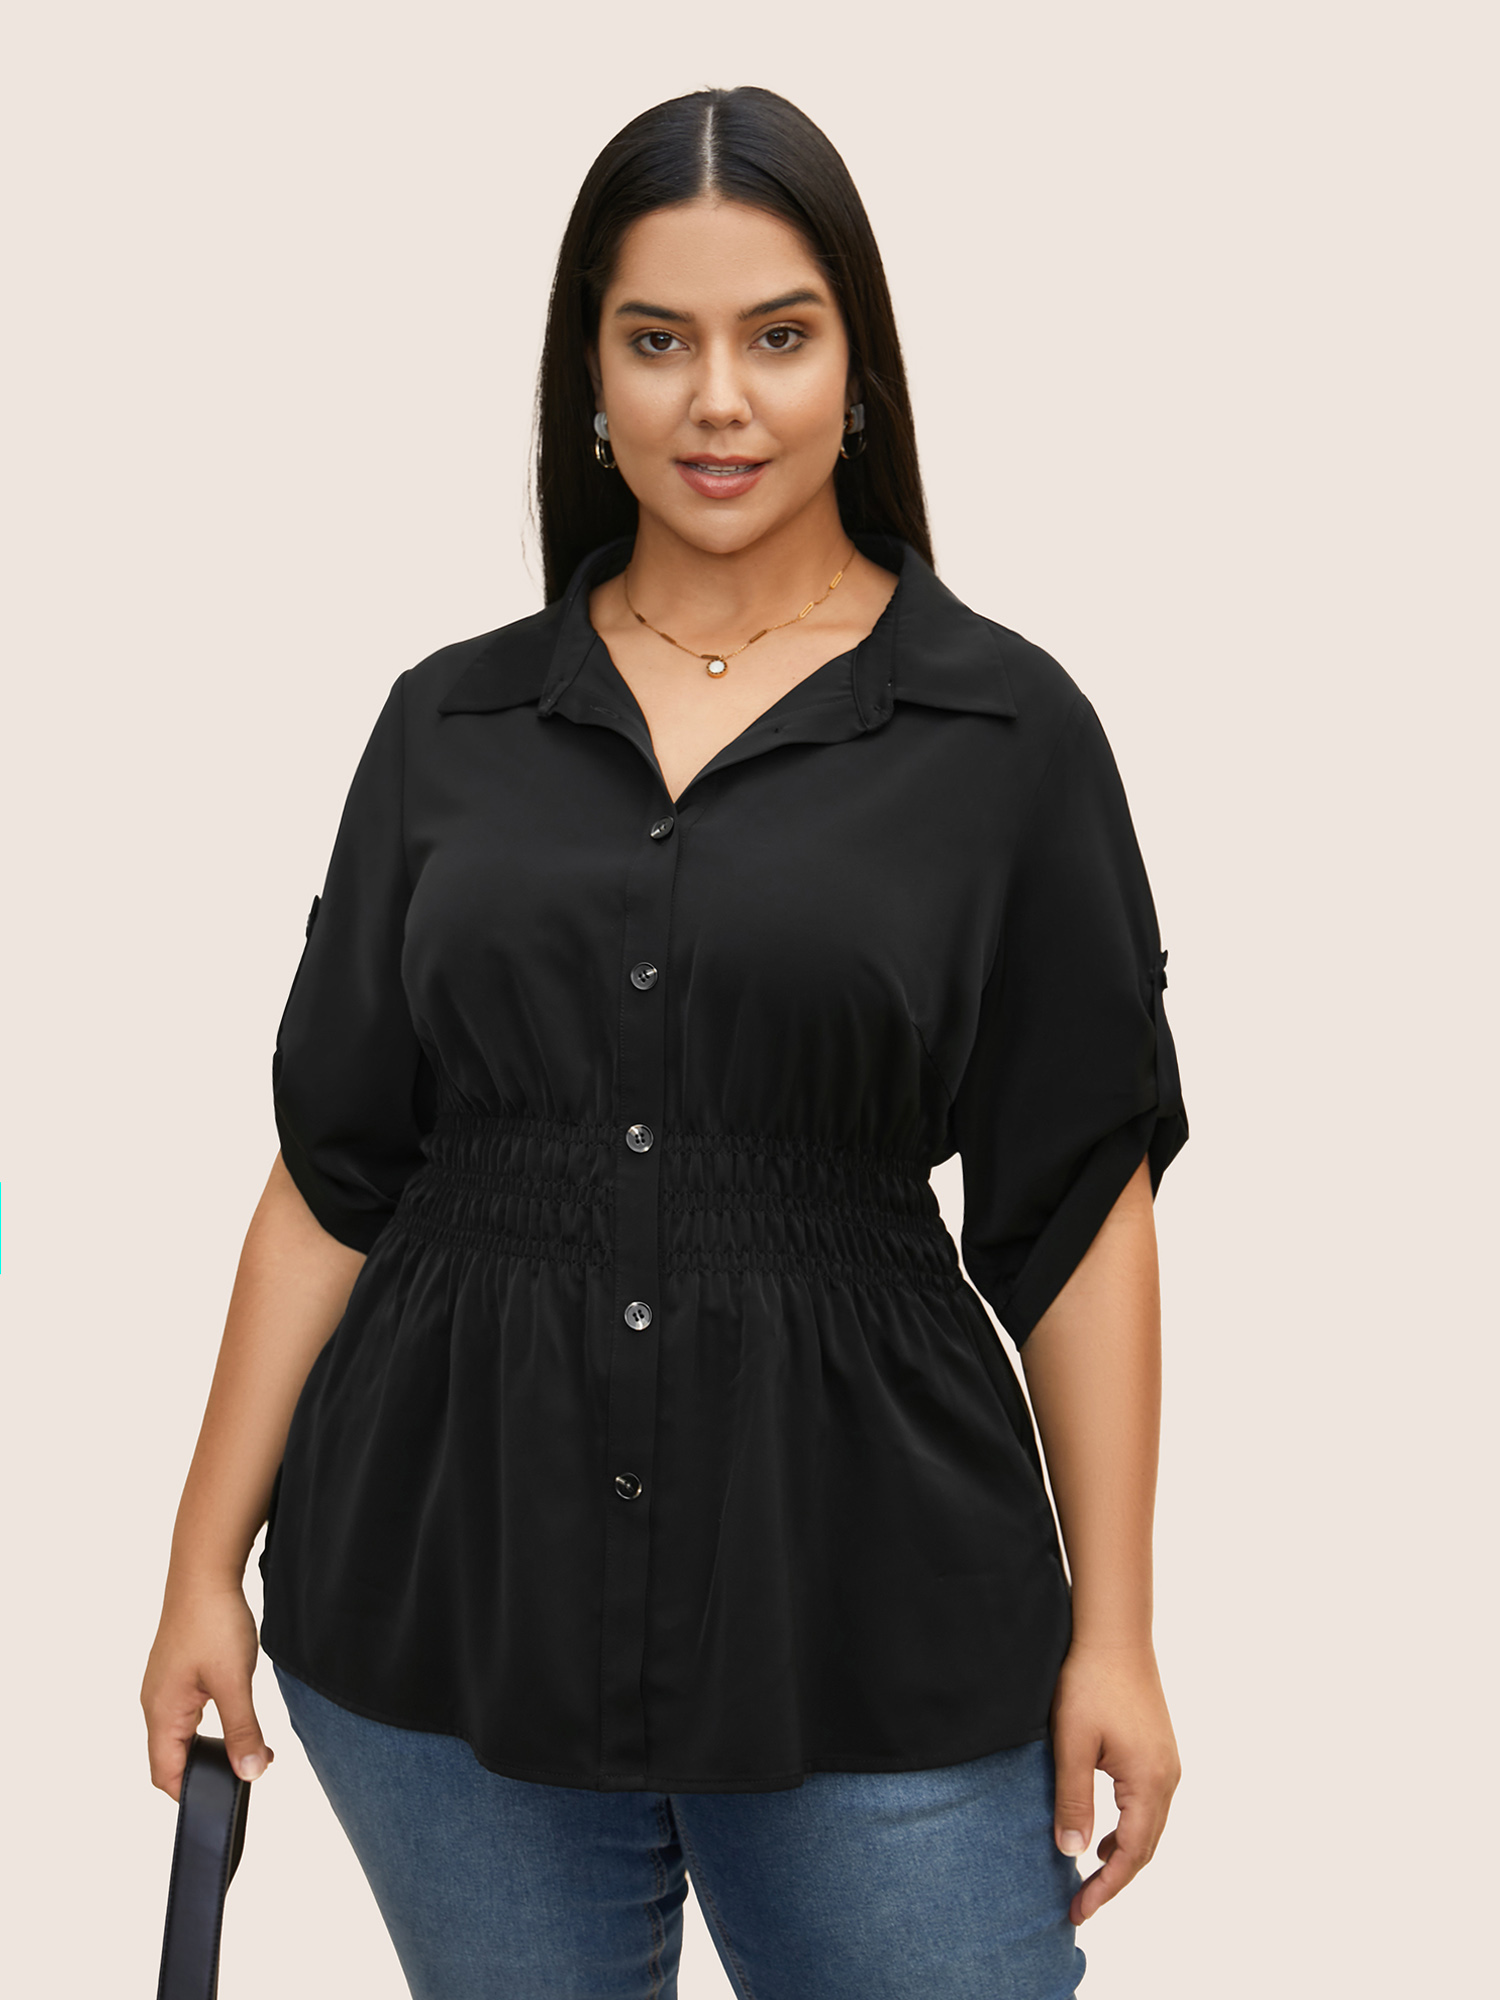 

Plus Size Black Anti-Wrinkle Shirt Collar Button Cuff Sleeve Blouse Women Work From Home Half Sleeve Shirt collar Work Blouses BloomChic